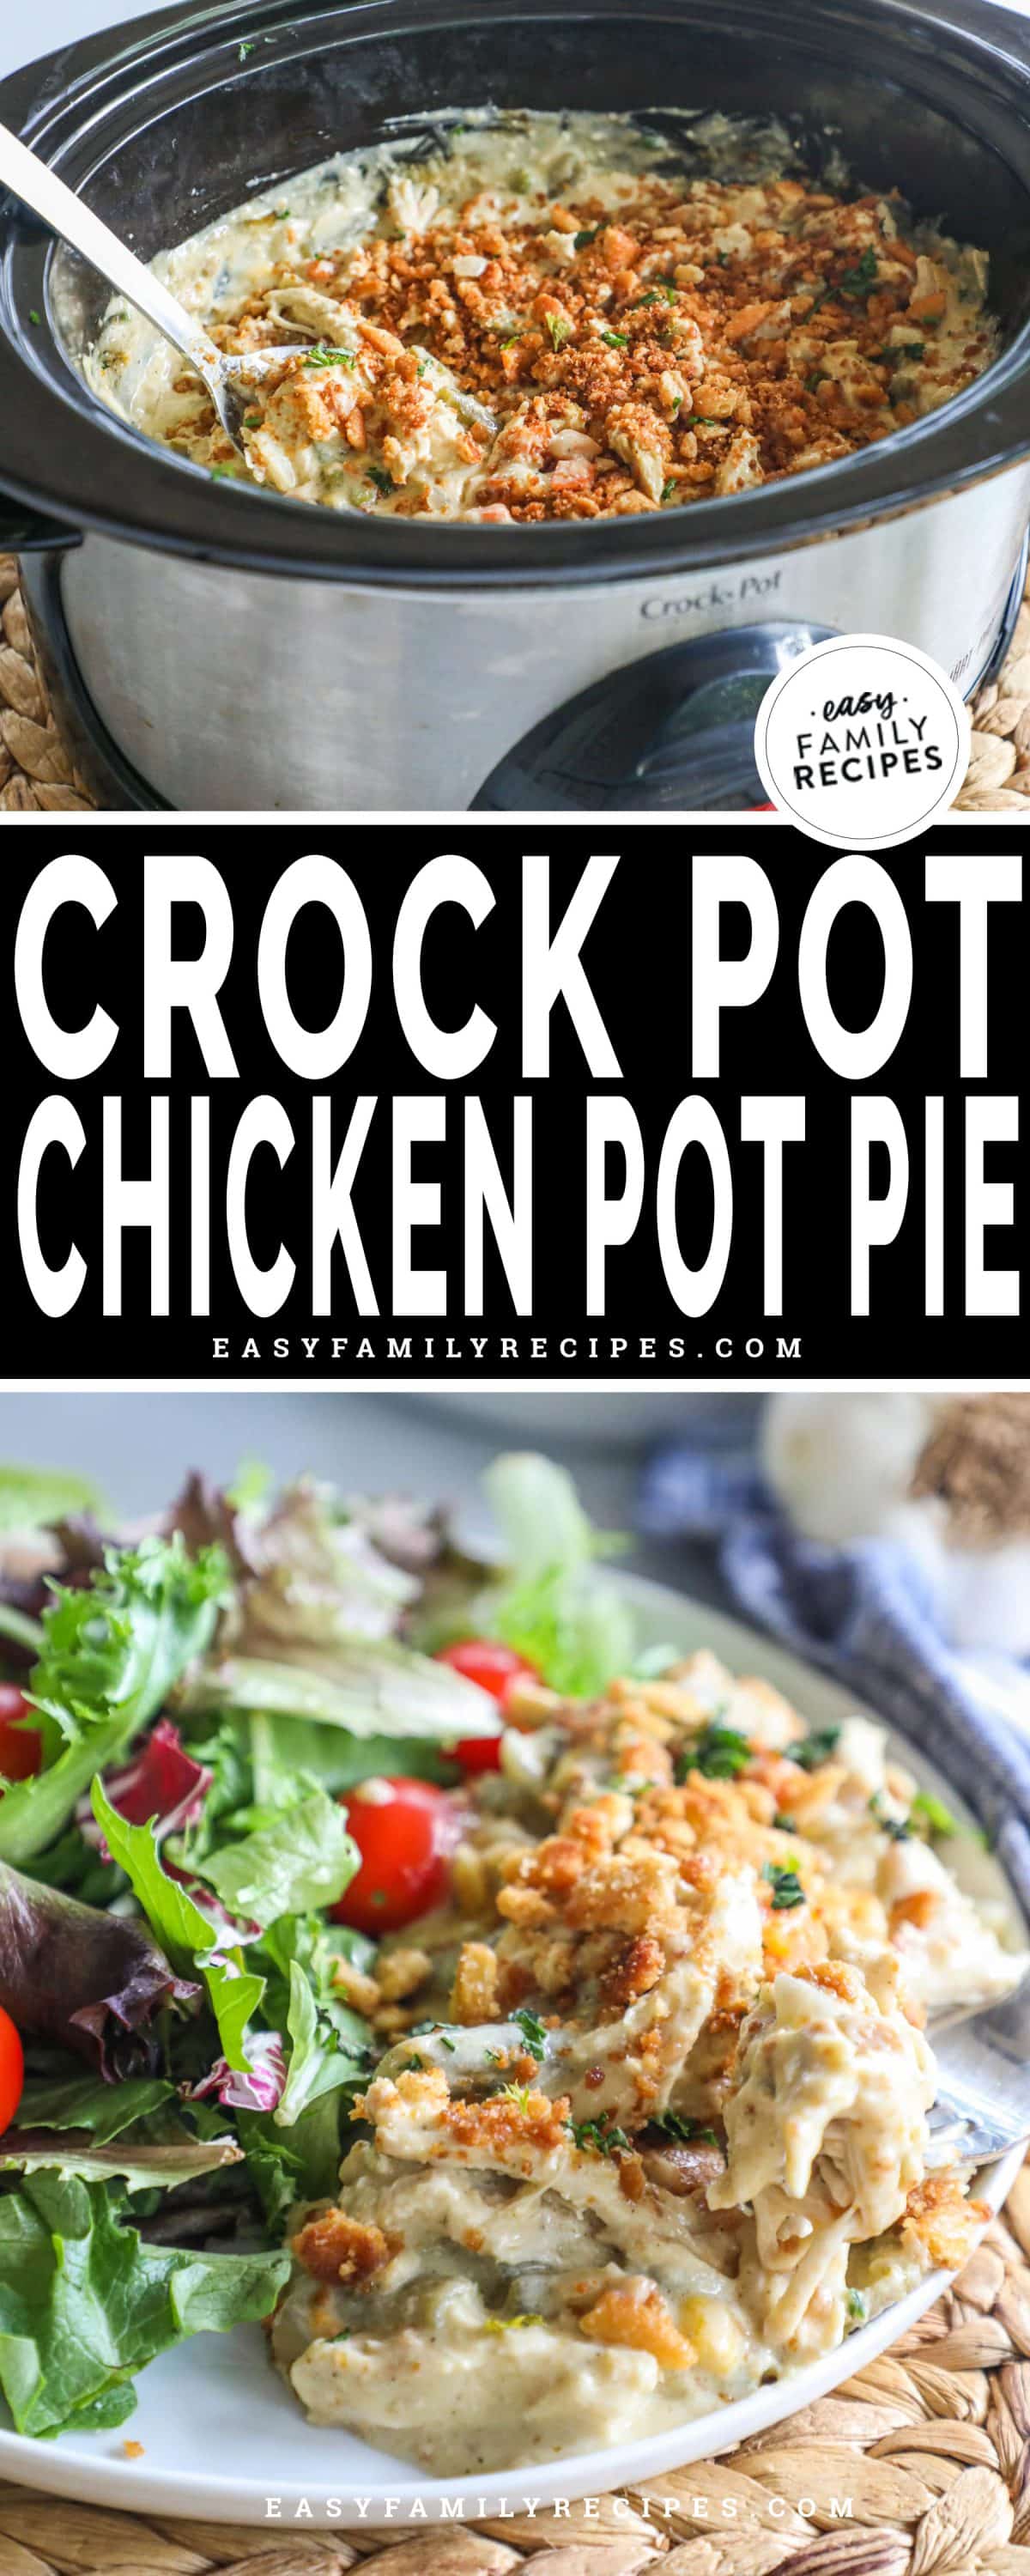 Chicken pot pie cooked in a crock pot then served with a green salad.